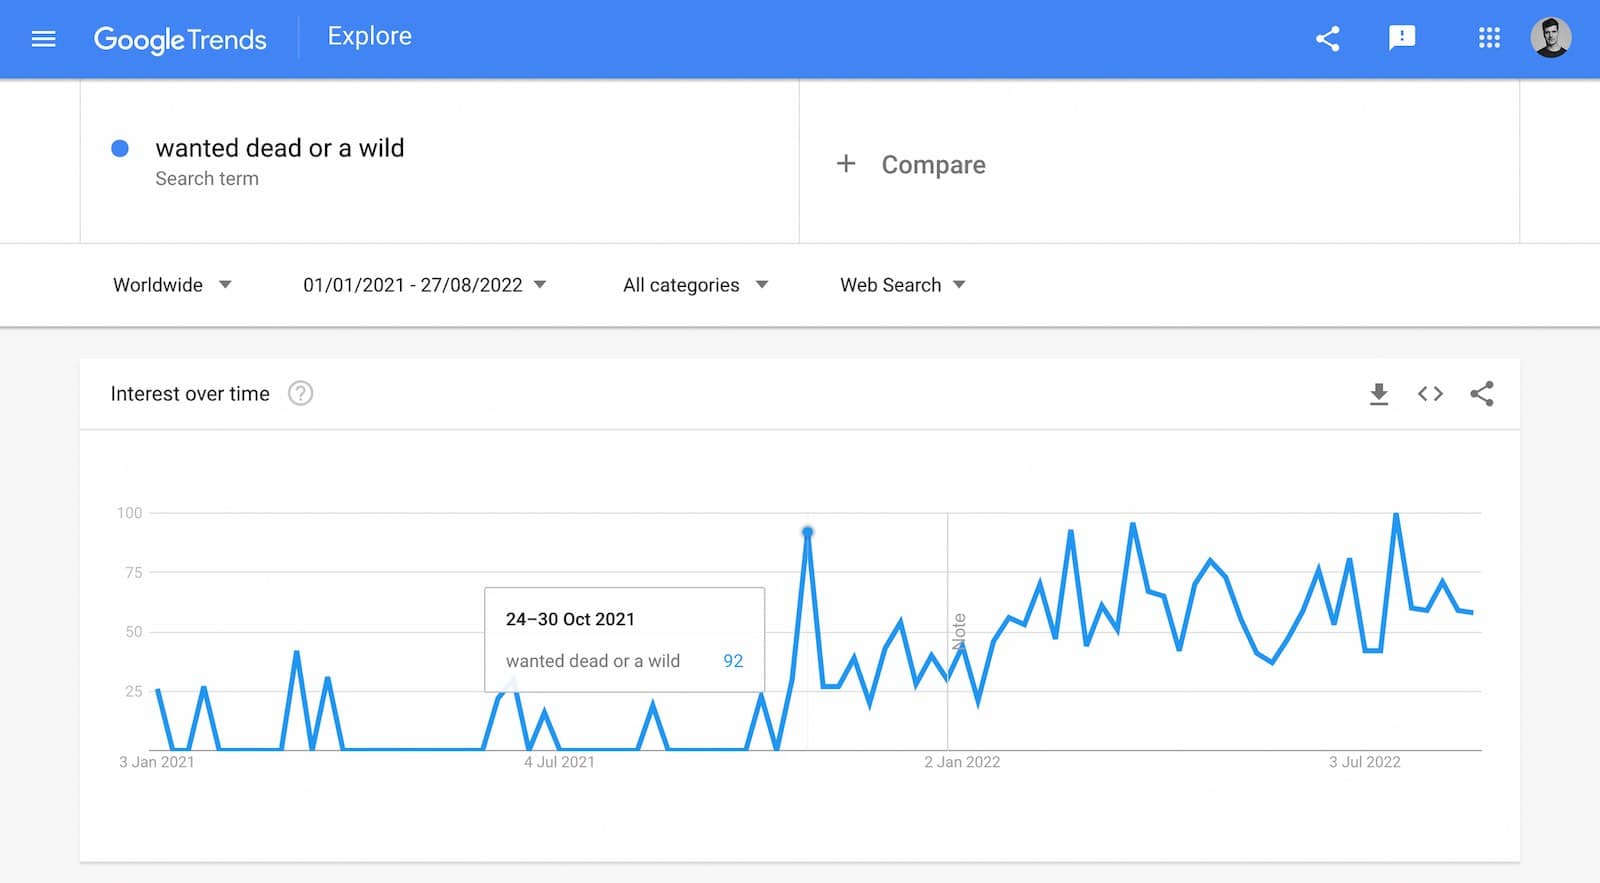 Google Trends Web Search – Wanted Dead or a Wild